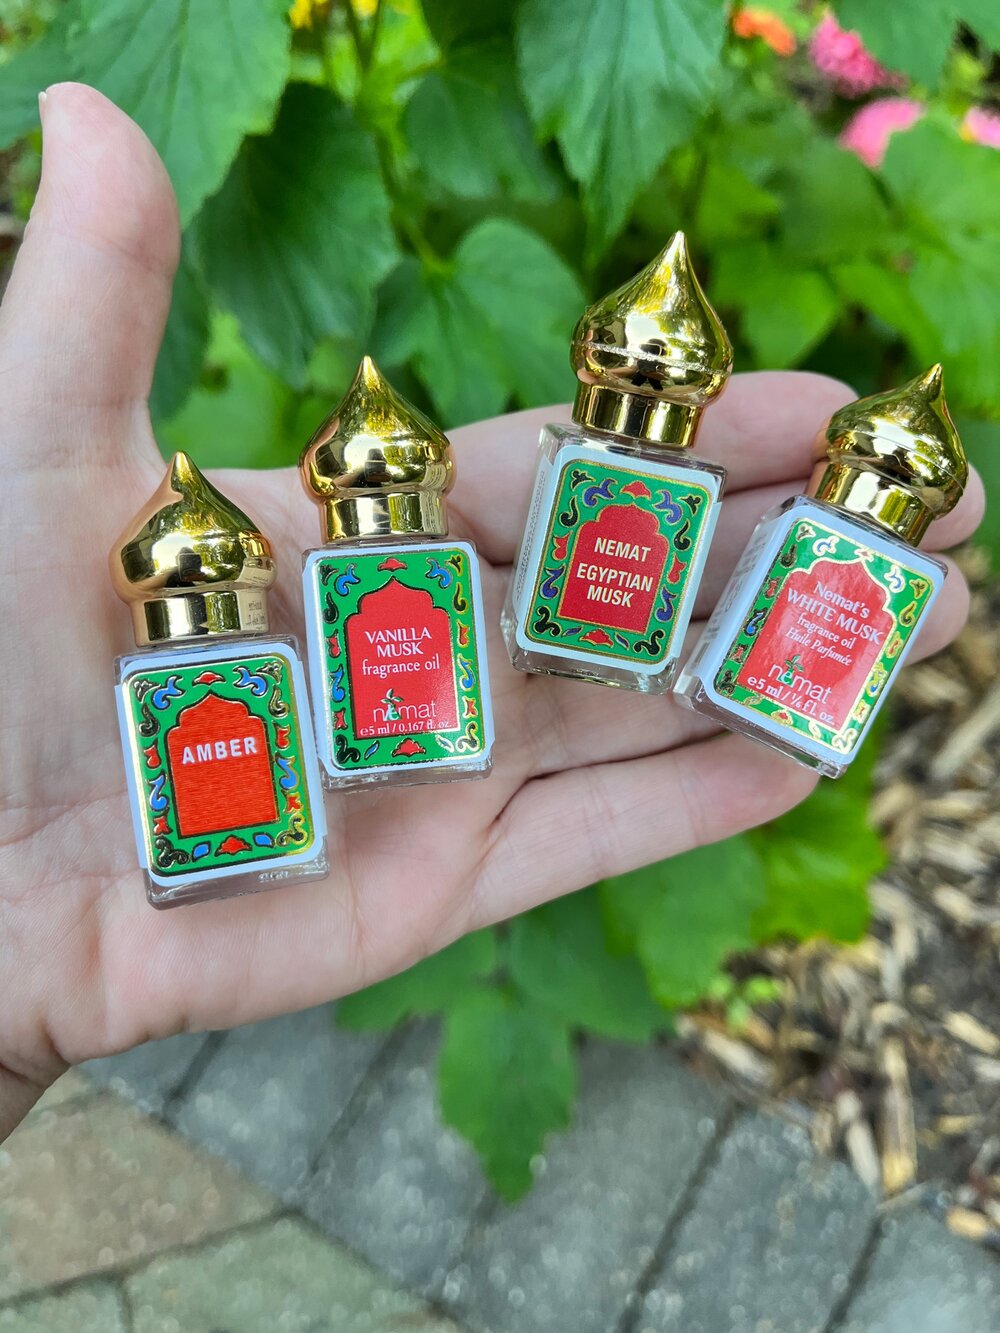 Nemat Perfume Oils - Herbs from the Labyrinth